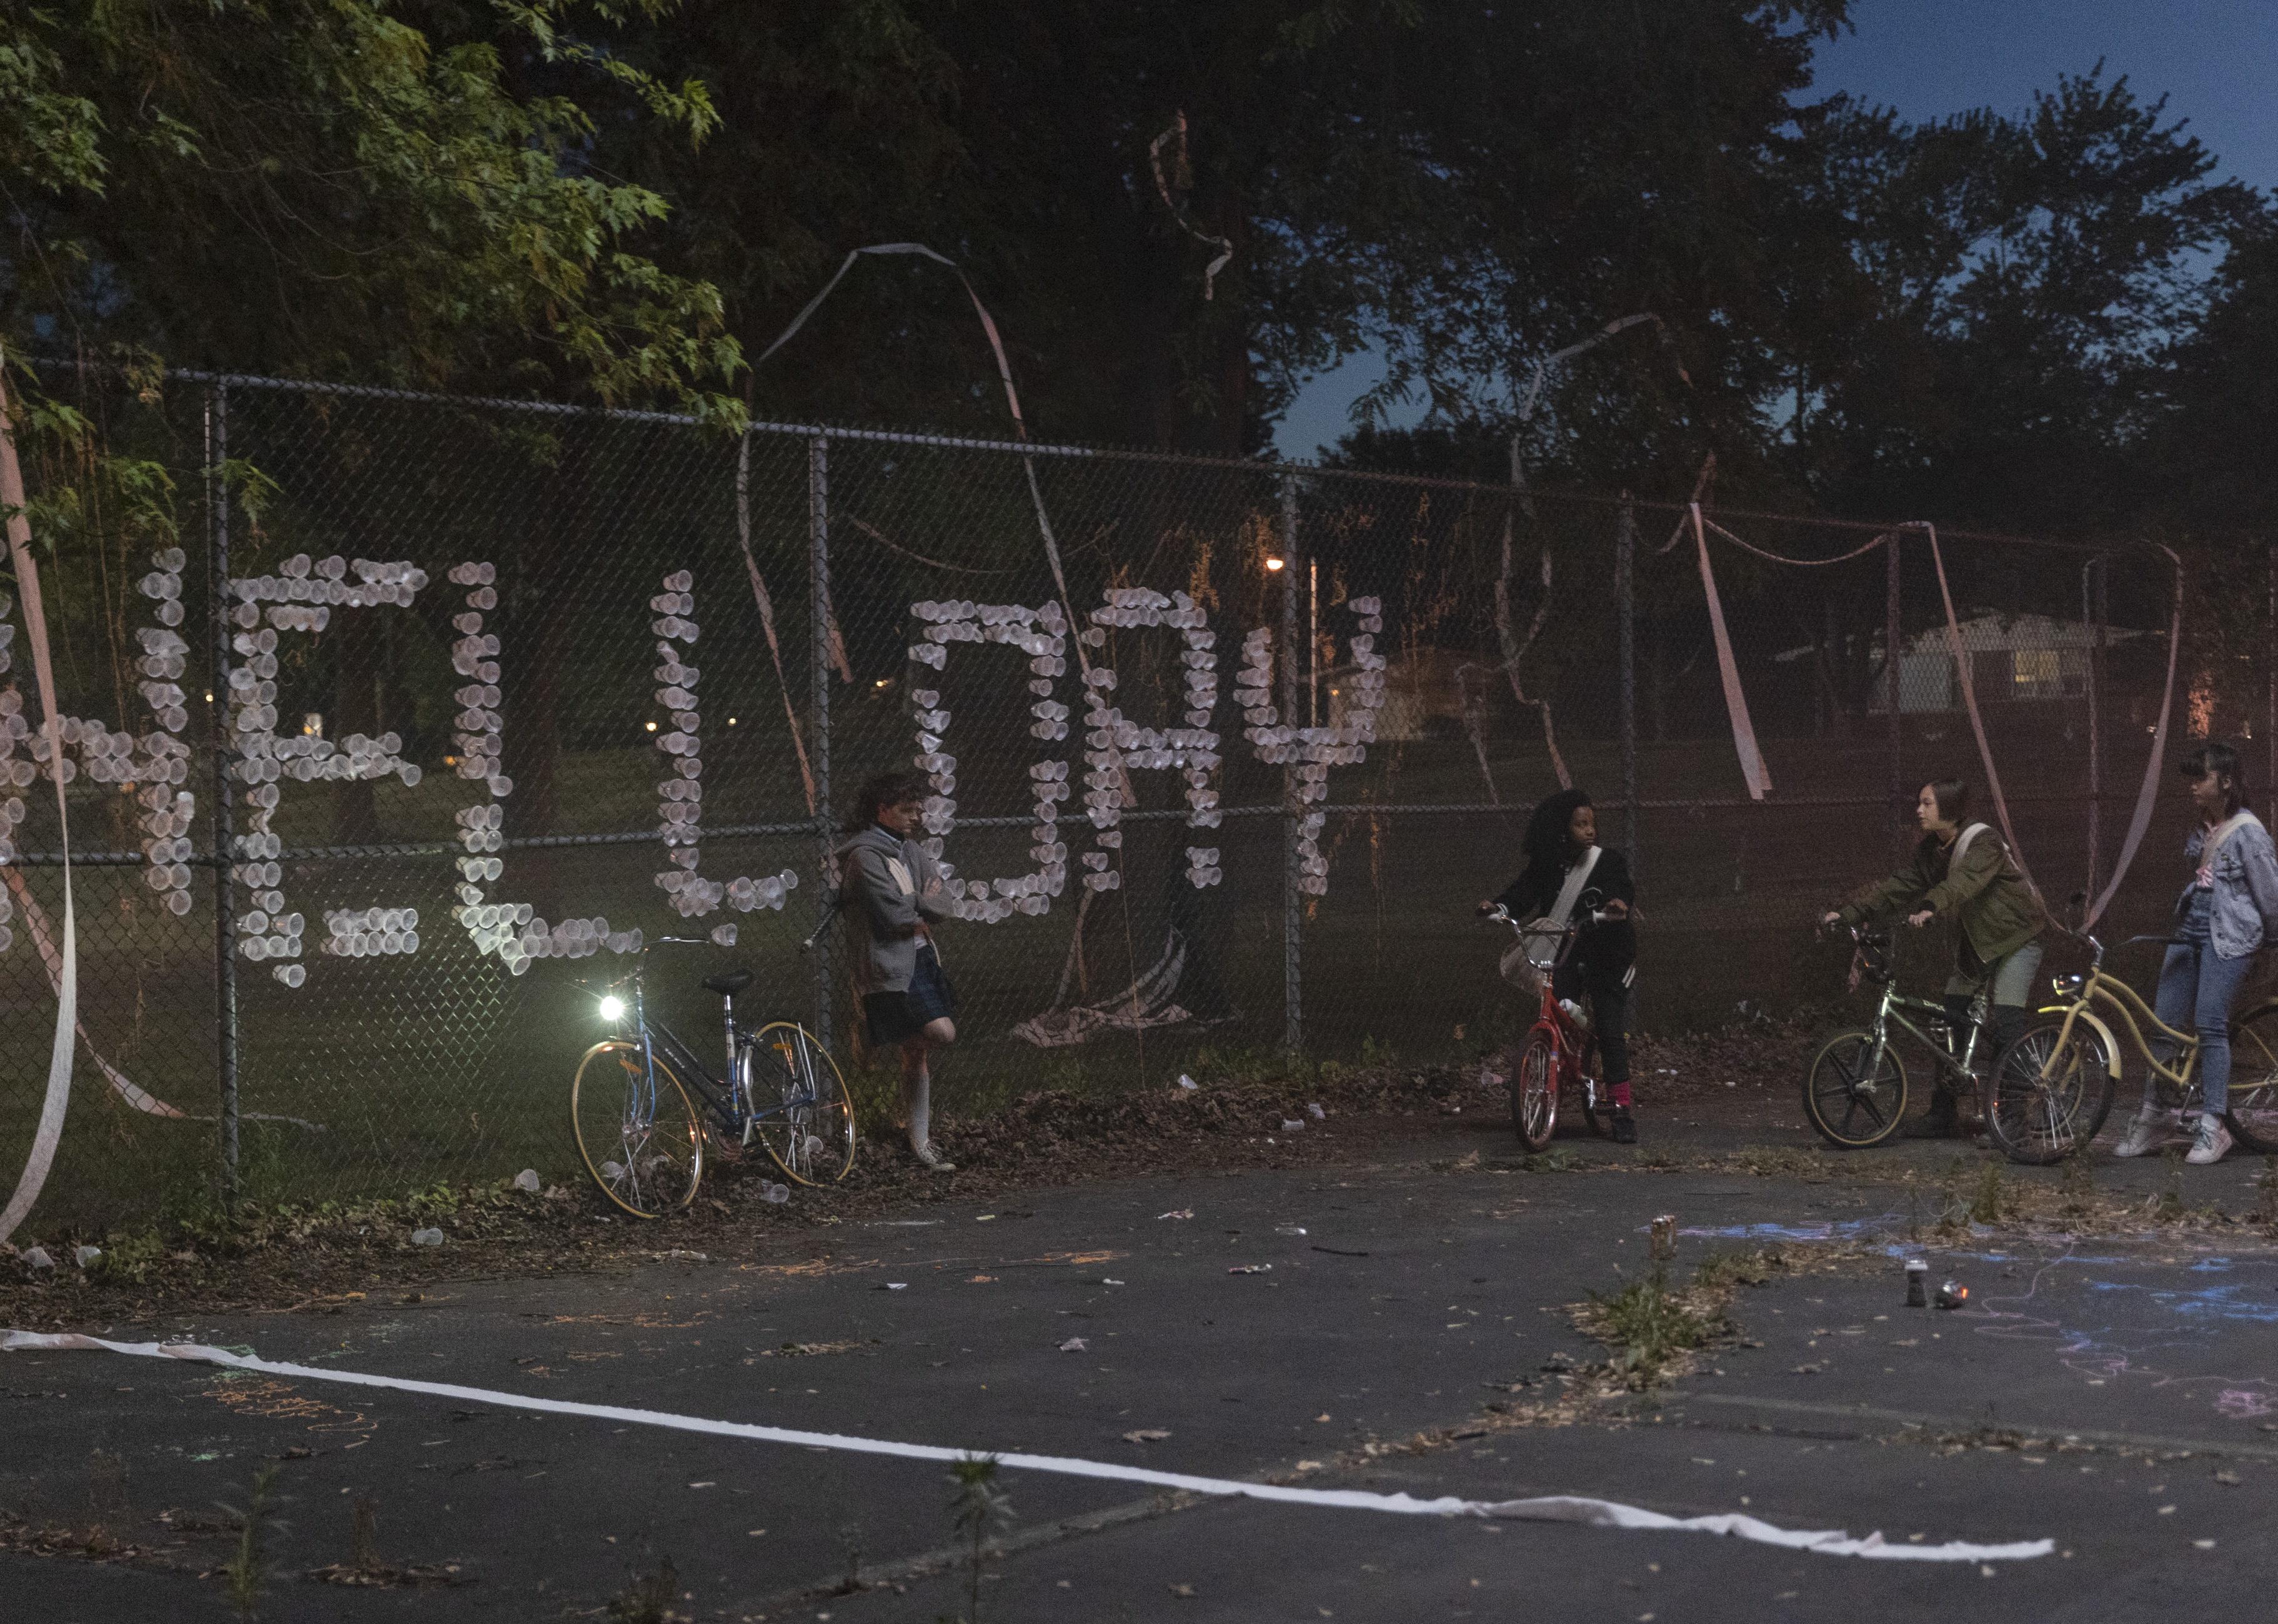 Four young disappointed girls with bikes next the message, "Hell Day", spelled out in cups on a fence.